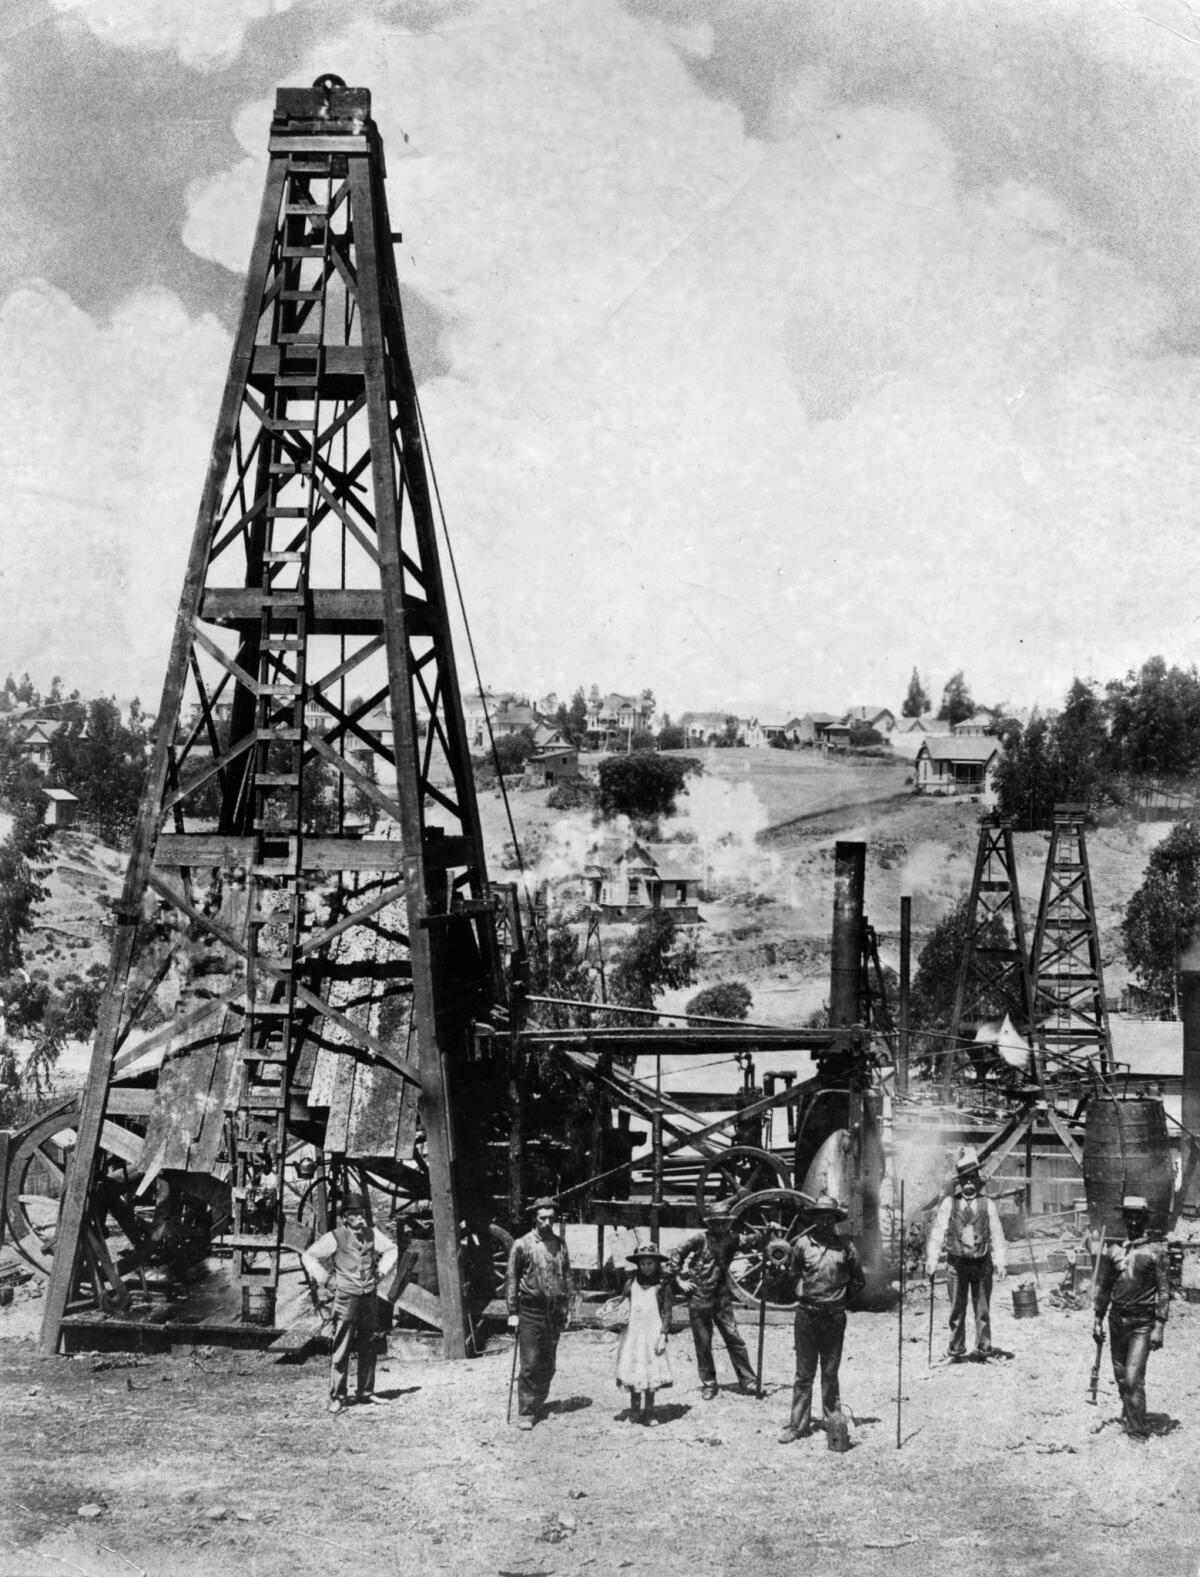 The Doheny oil well, circa 1900, at what is now the corner of 2nd Street and Glendale Boulevard.